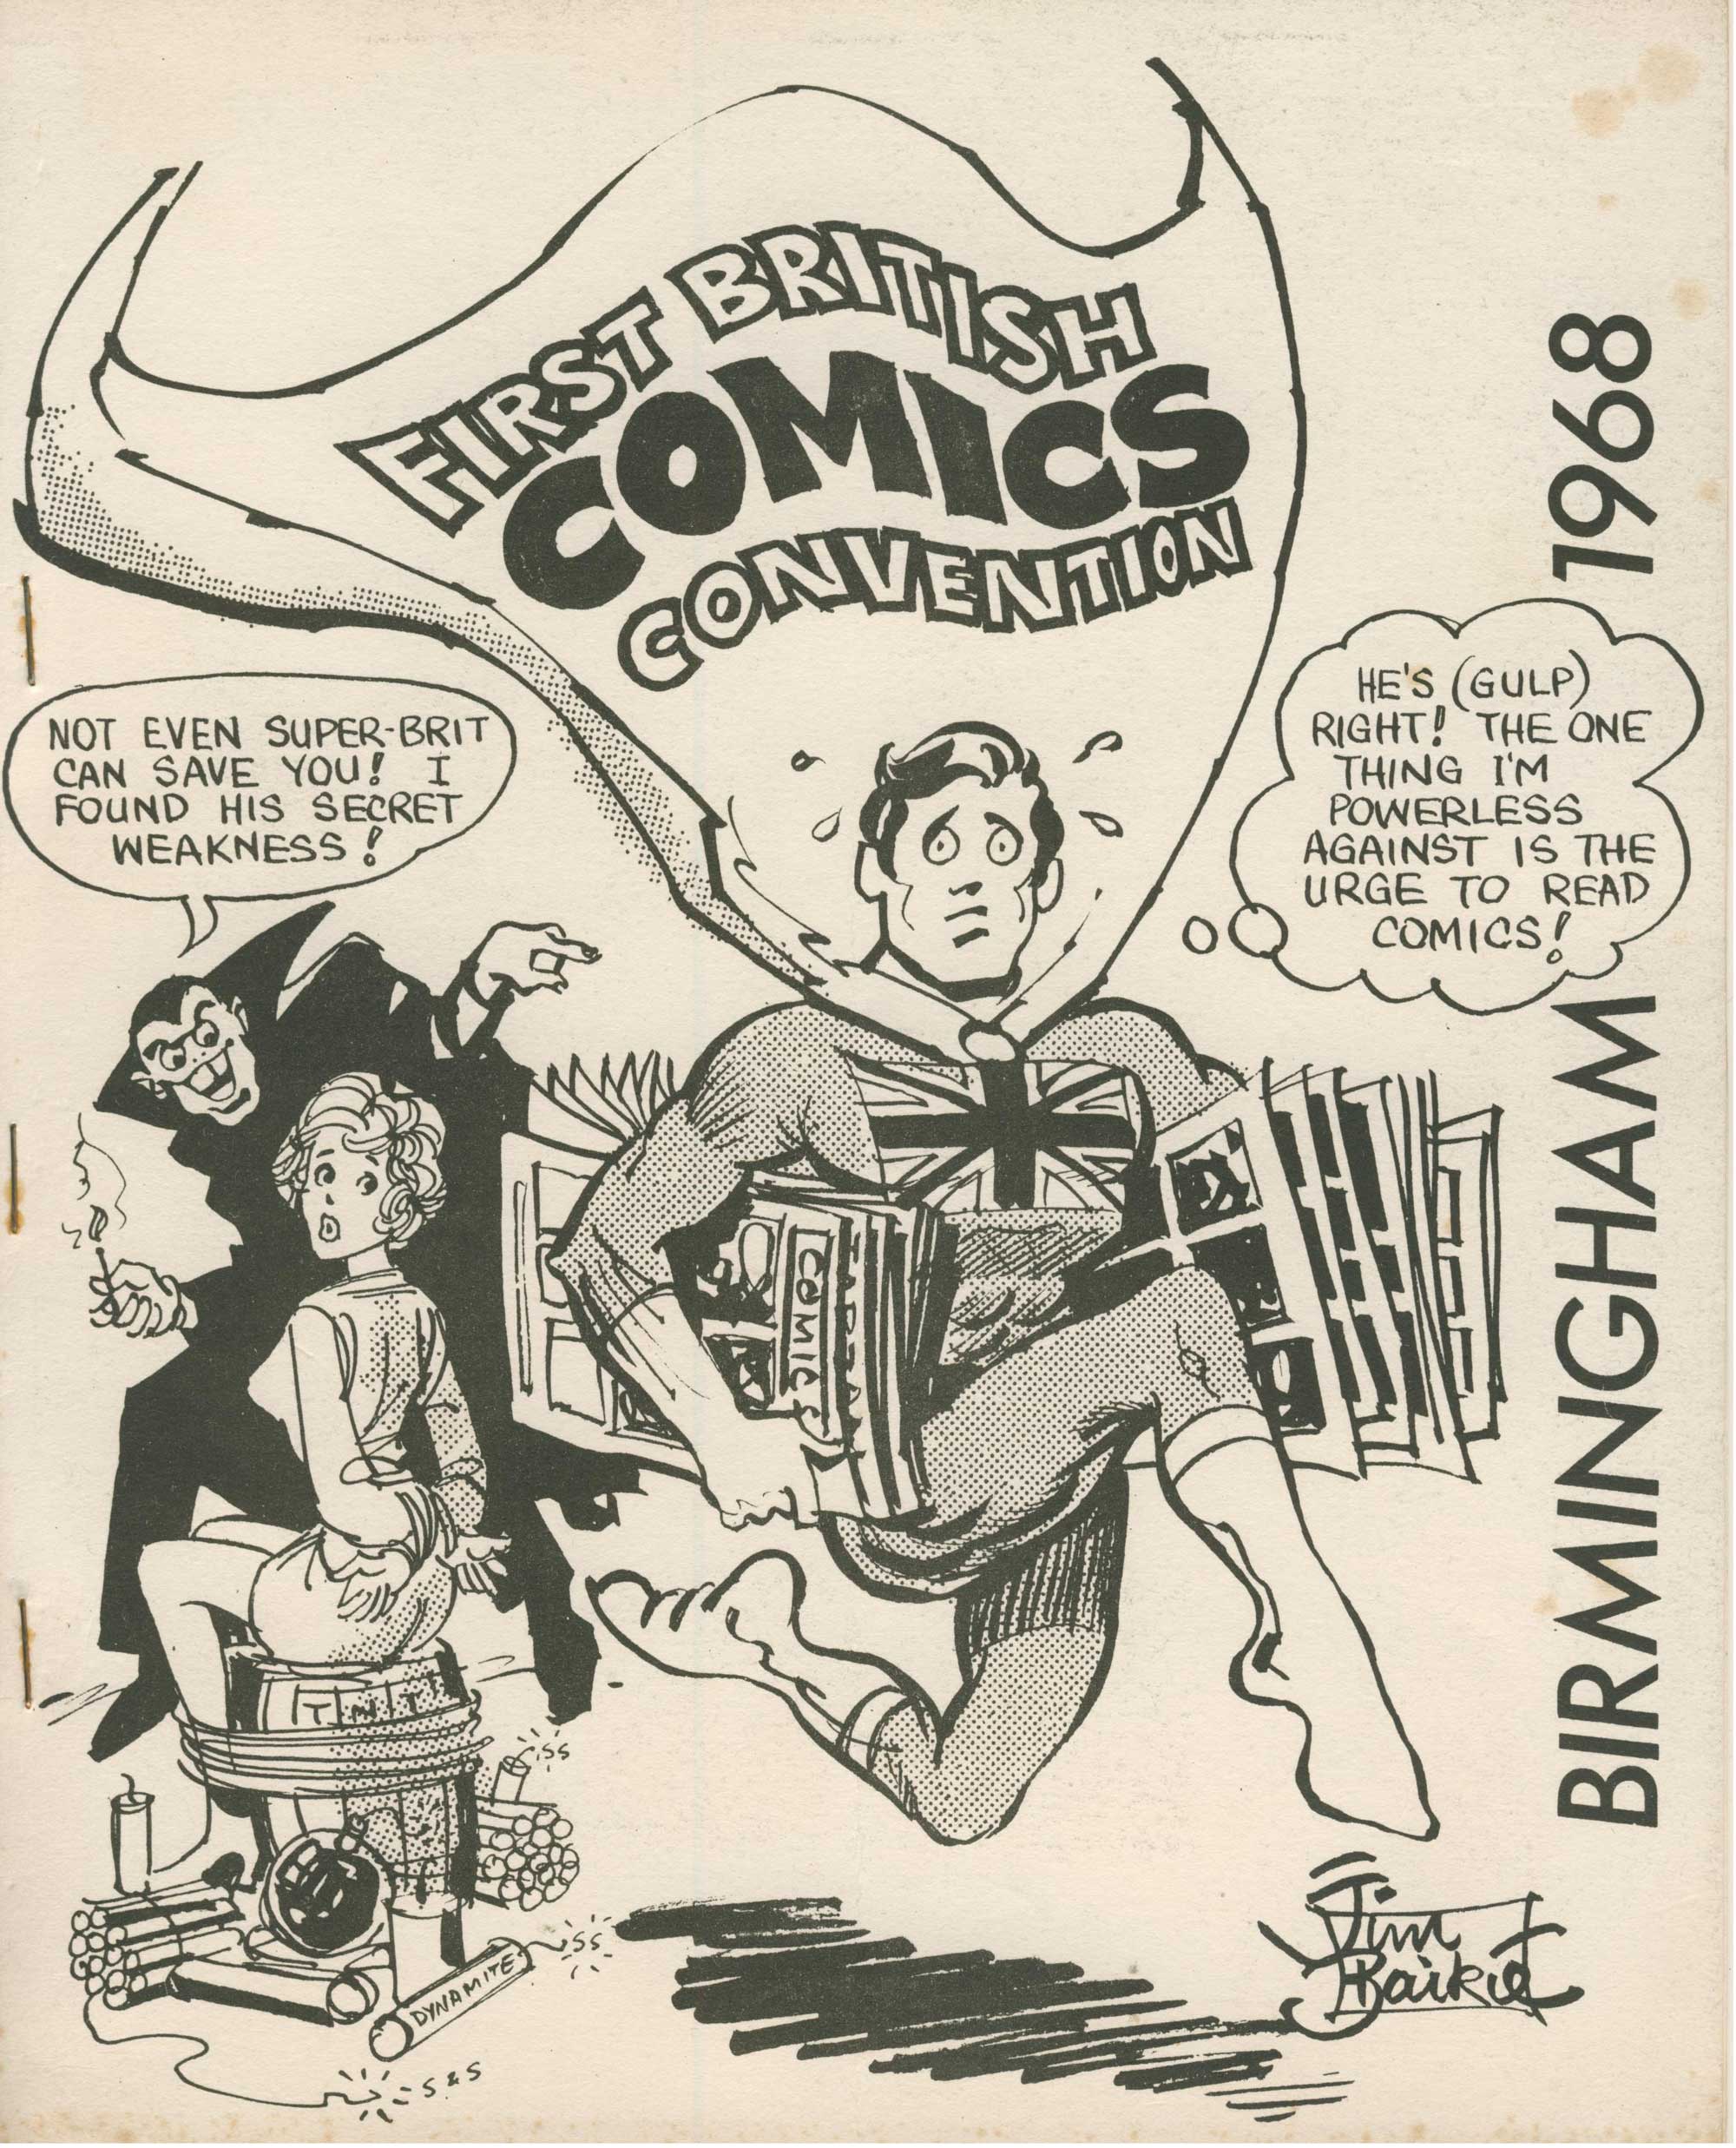 This was the planned cover for the convention booklet for the first ever British Comic Convention, but printed copies didn't arrive in the post.